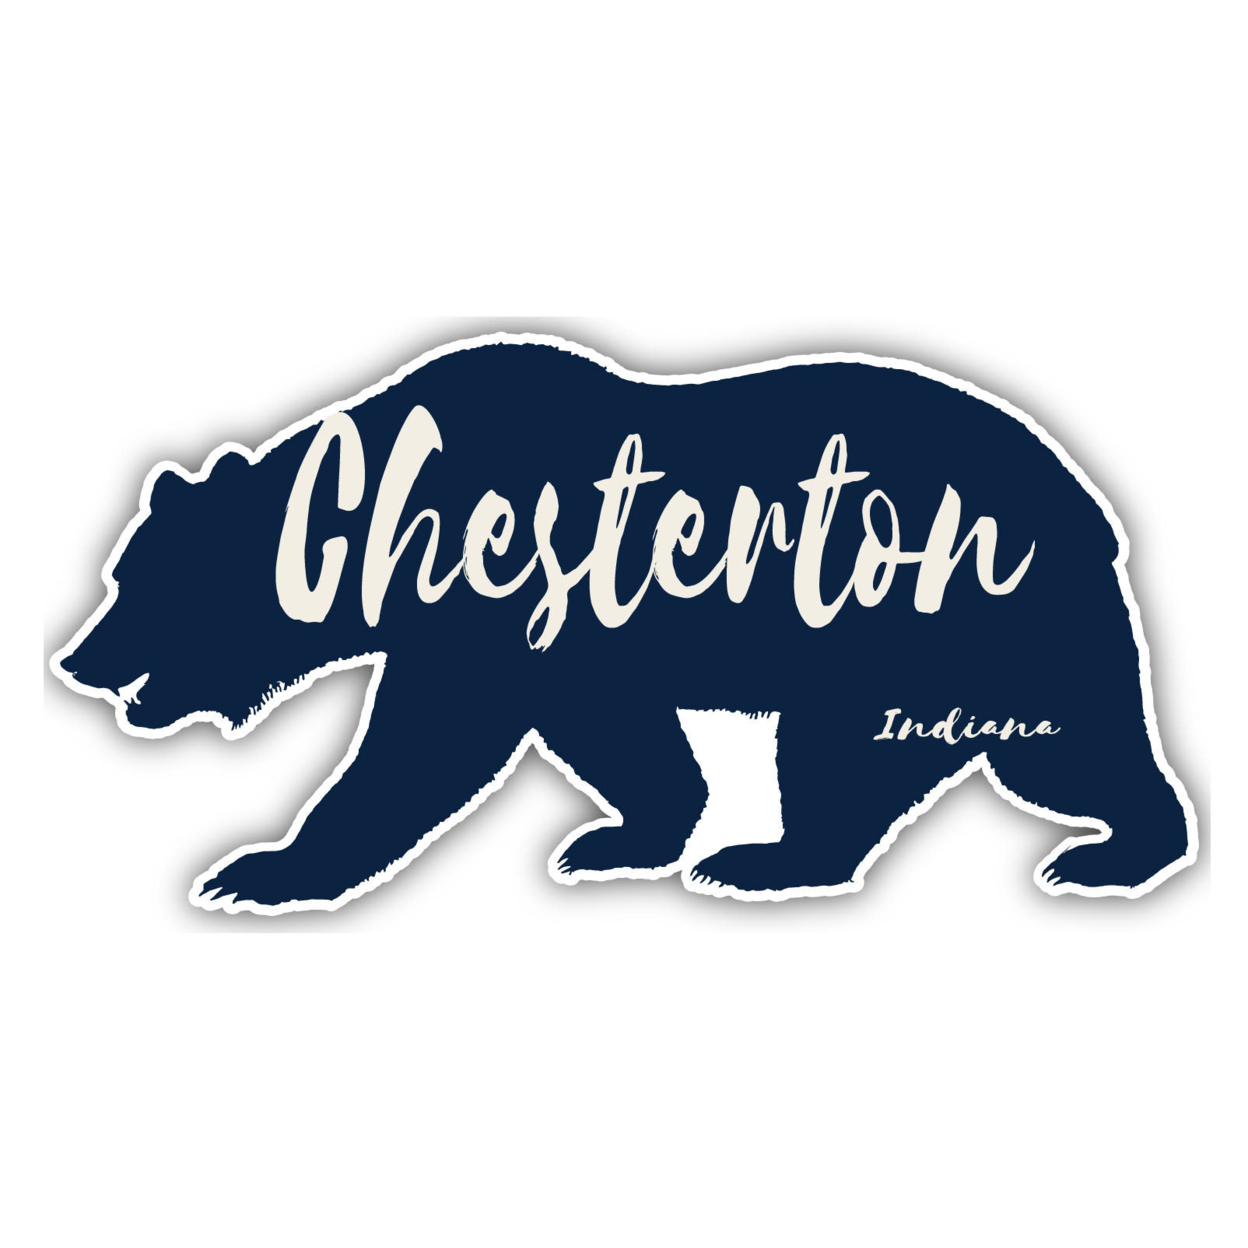 Chesterton Indiana Souvenir Decorative Stickers (Choose Theme And Size) - Single Unit, 4-Inch, Adventures Awaits